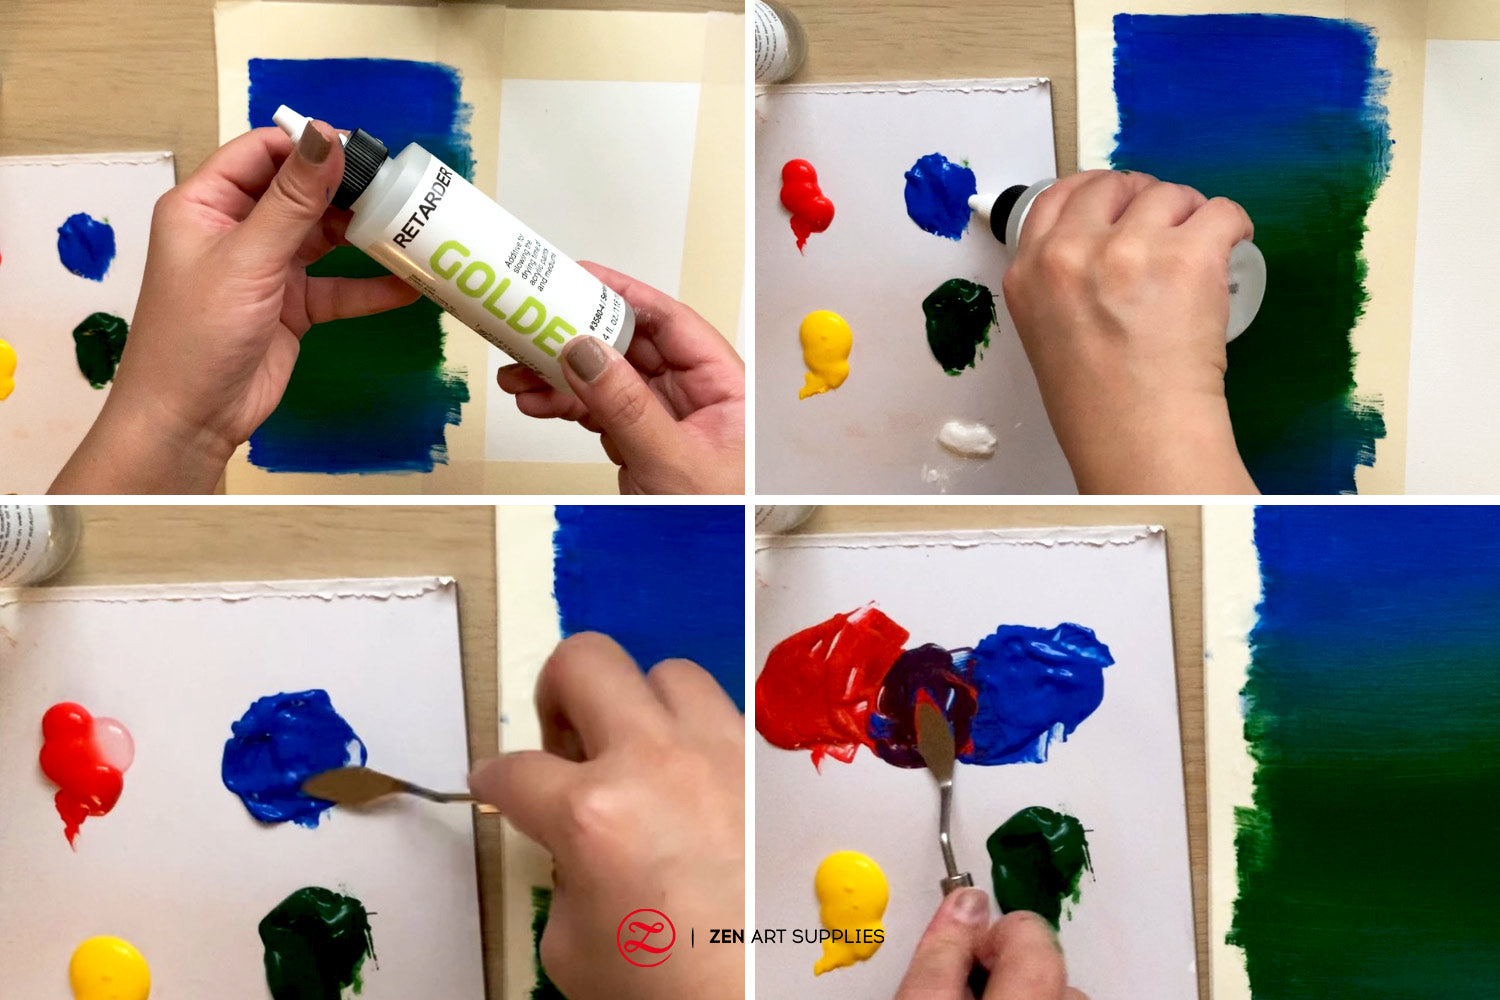 How to Blend Acrylic Paint - 3 Blending Techniques for Beginners